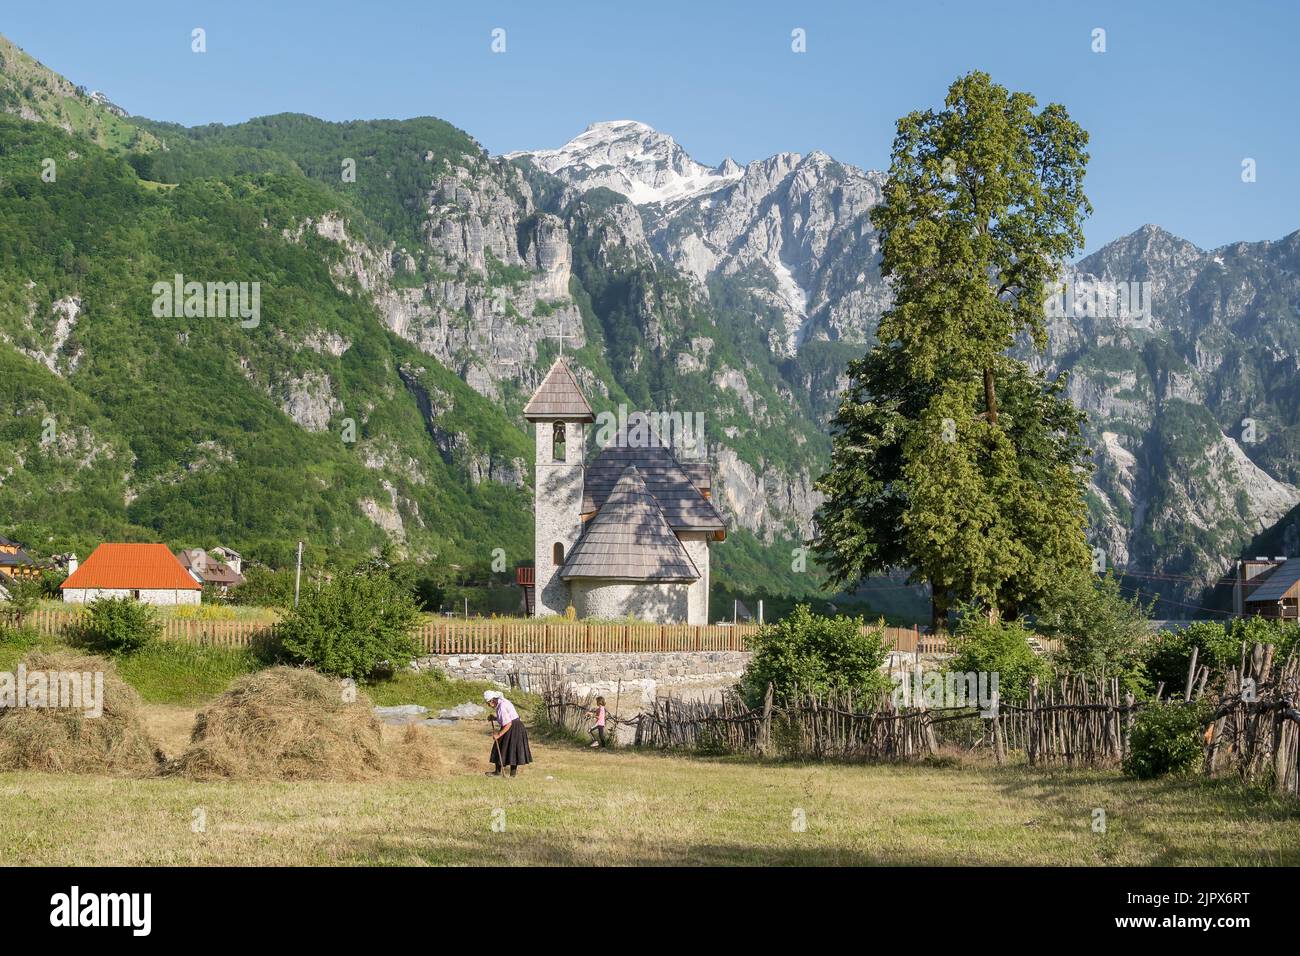 Rural scene from the Albanian village Theth Stock Photo